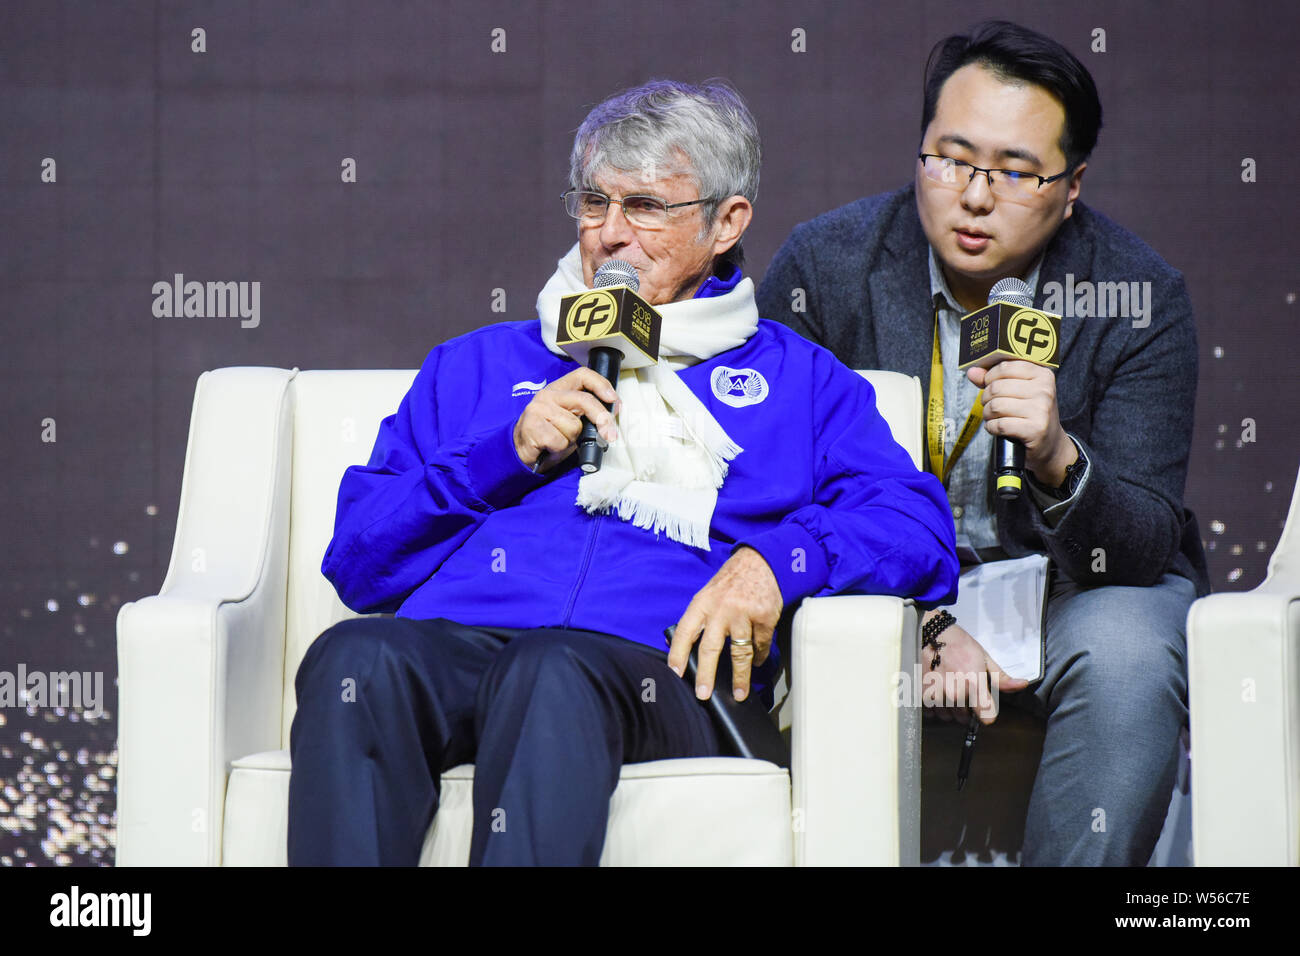 Serbian football coach and former player Bora Milutinovic attends the Chinese Football And Esports Forum during the 2018 Chinese Footballer of the Yea Stock Photo